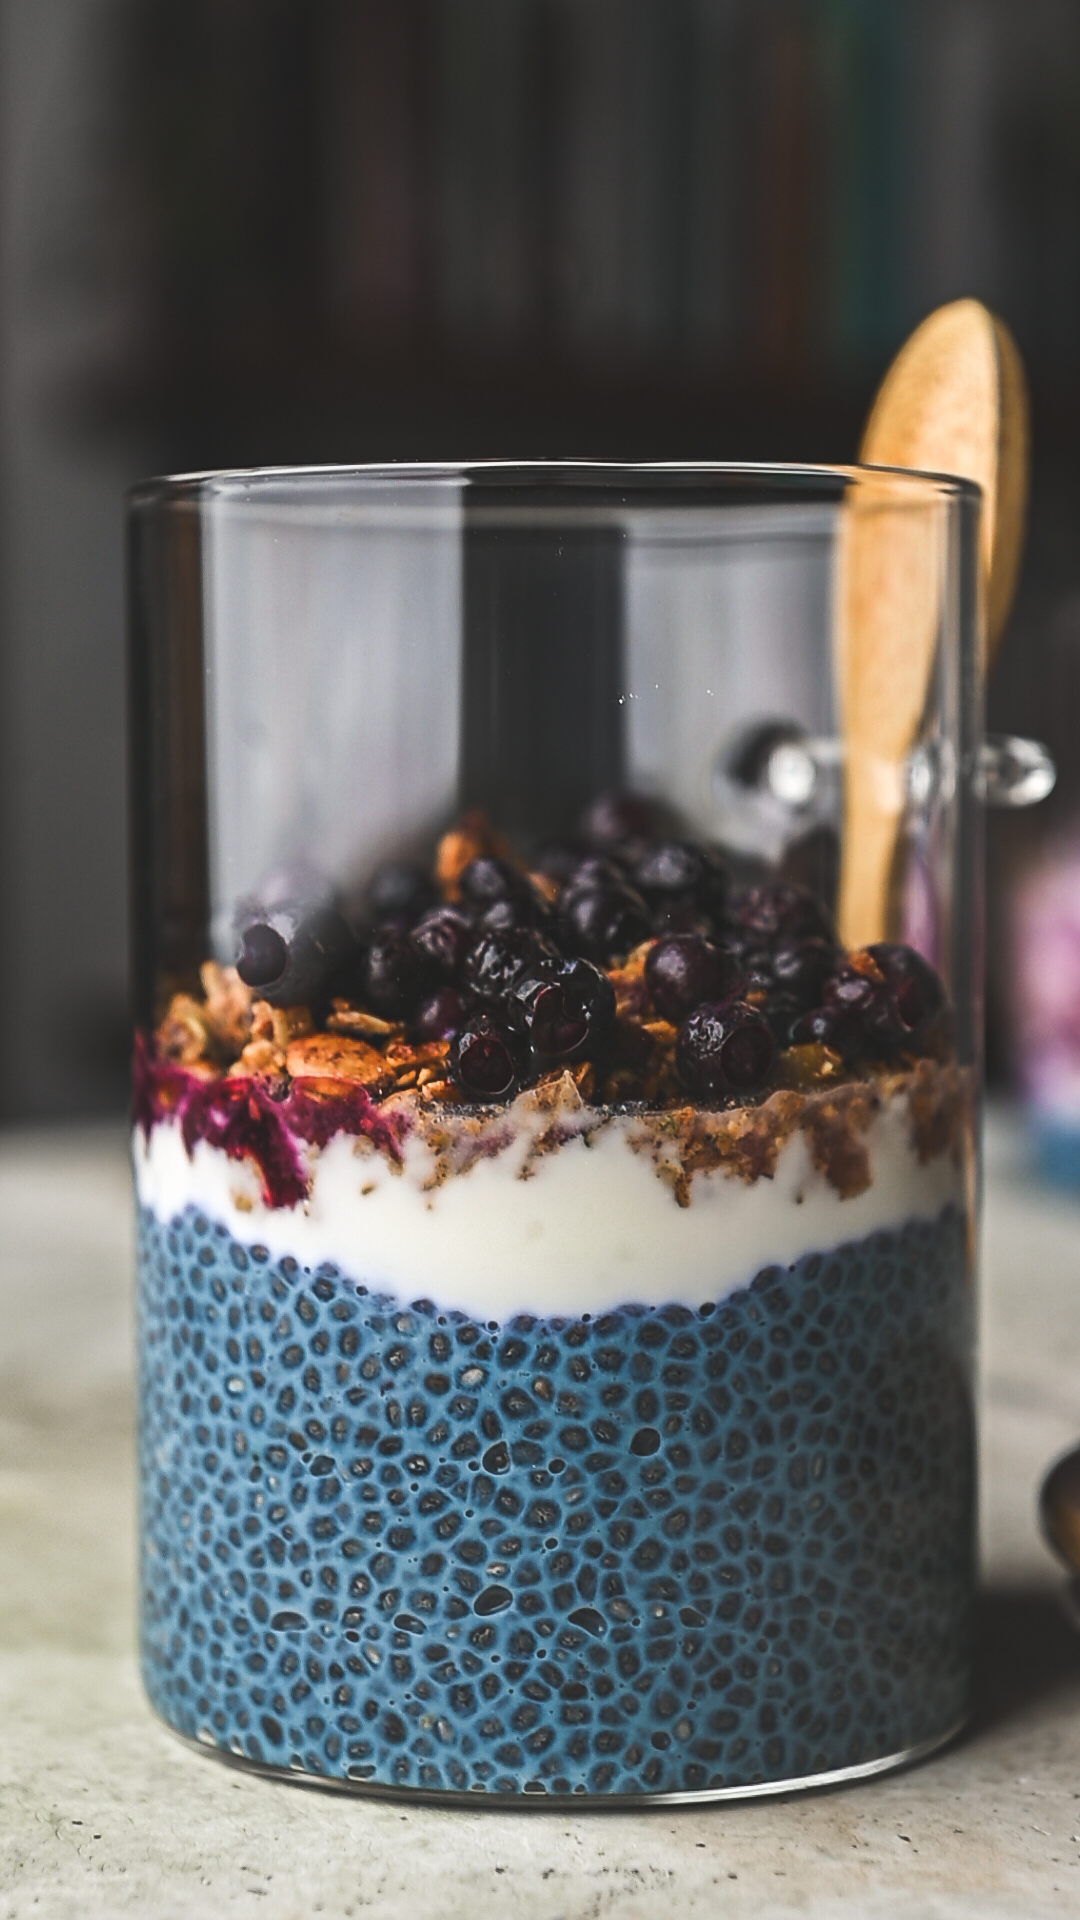 Glass jar with blue chia pudding, granola and blueberries by teri-ann carty